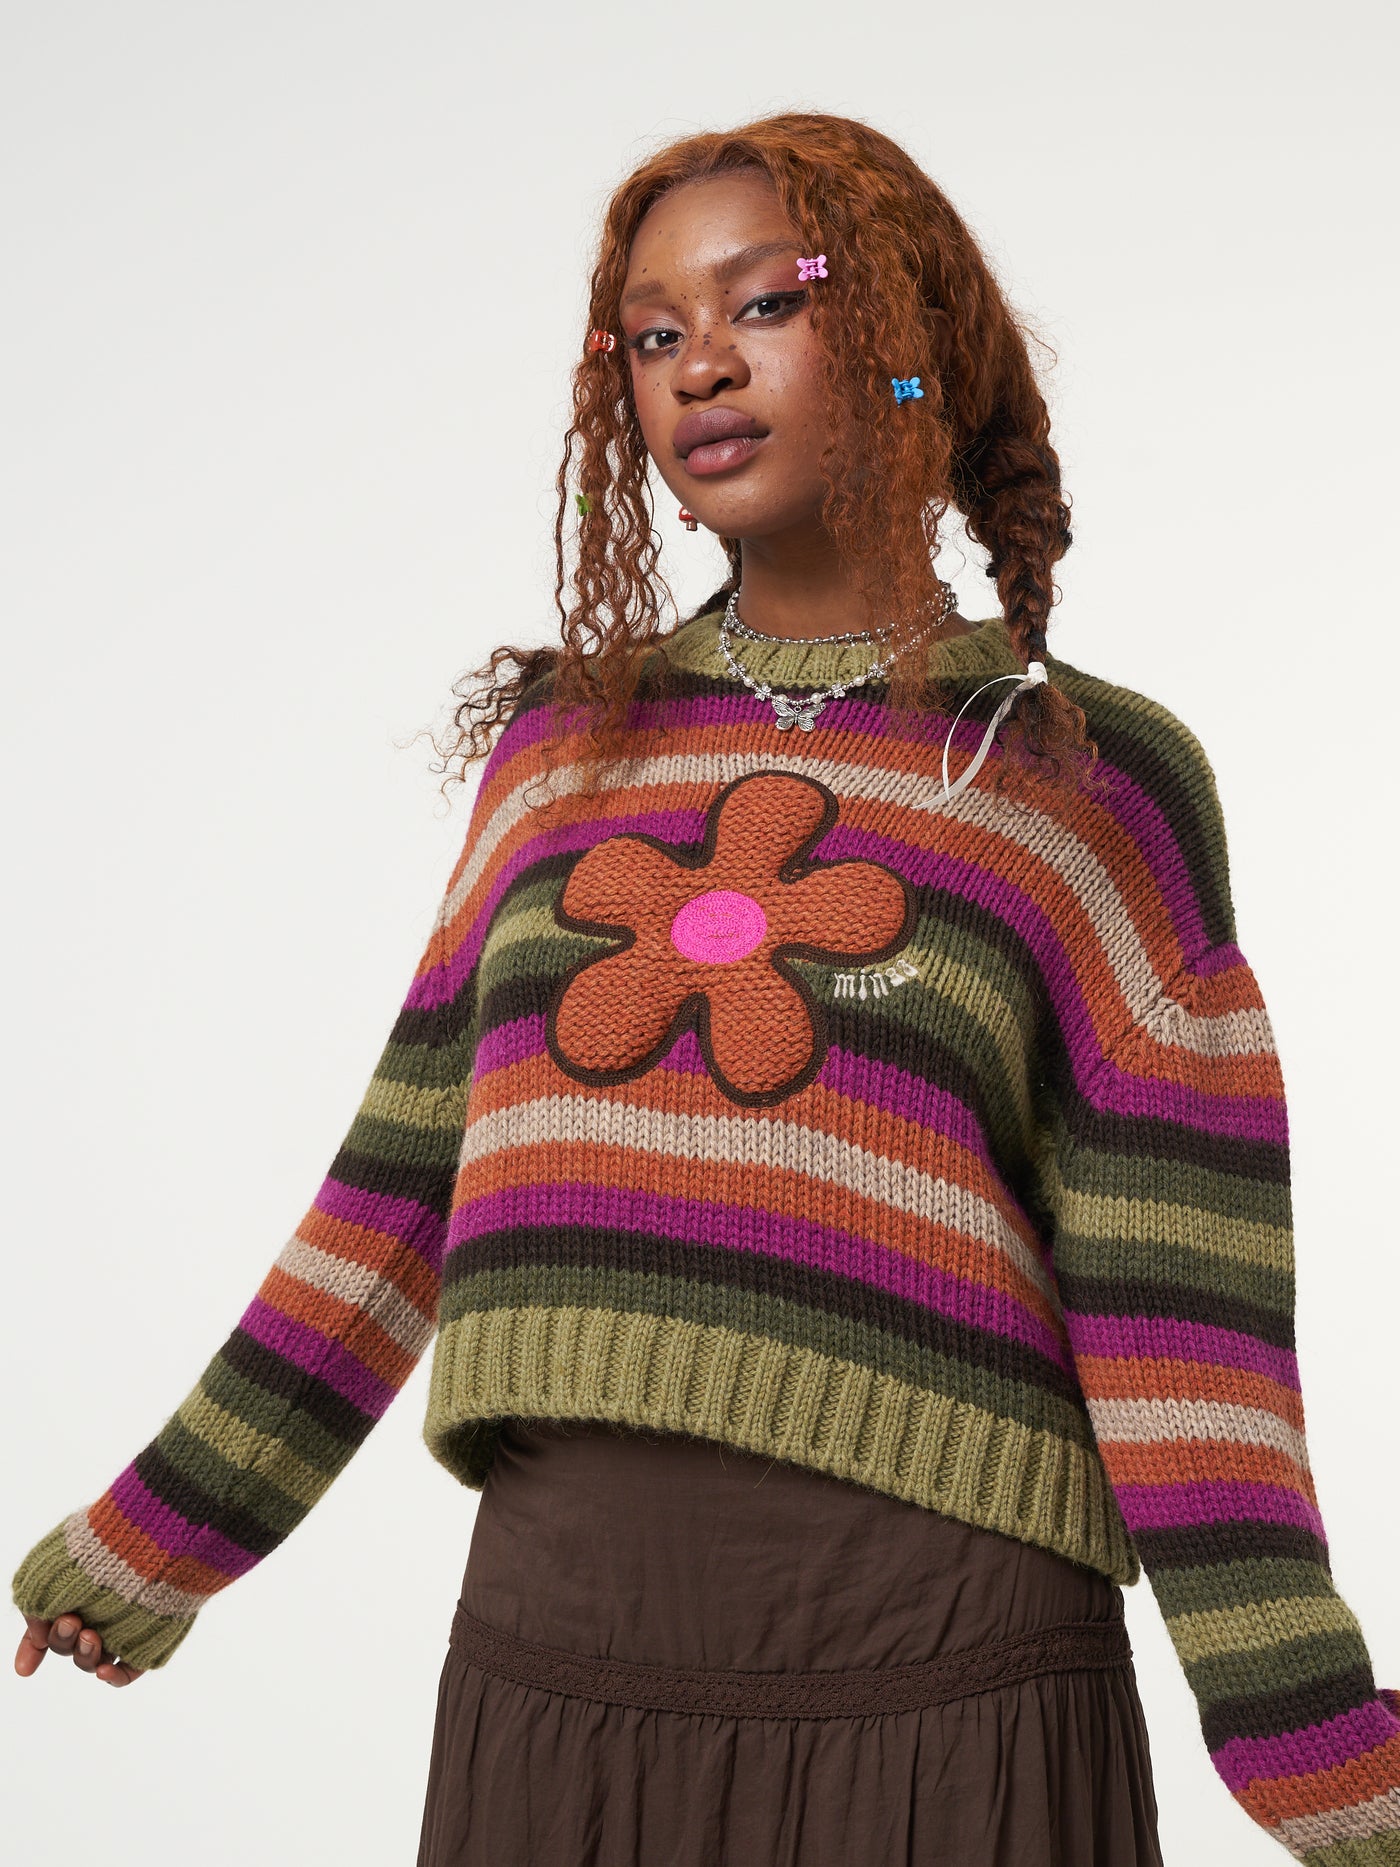 Knitted jumper in orange, pink, green and brown stripes featuring front Retro Flower embroidery